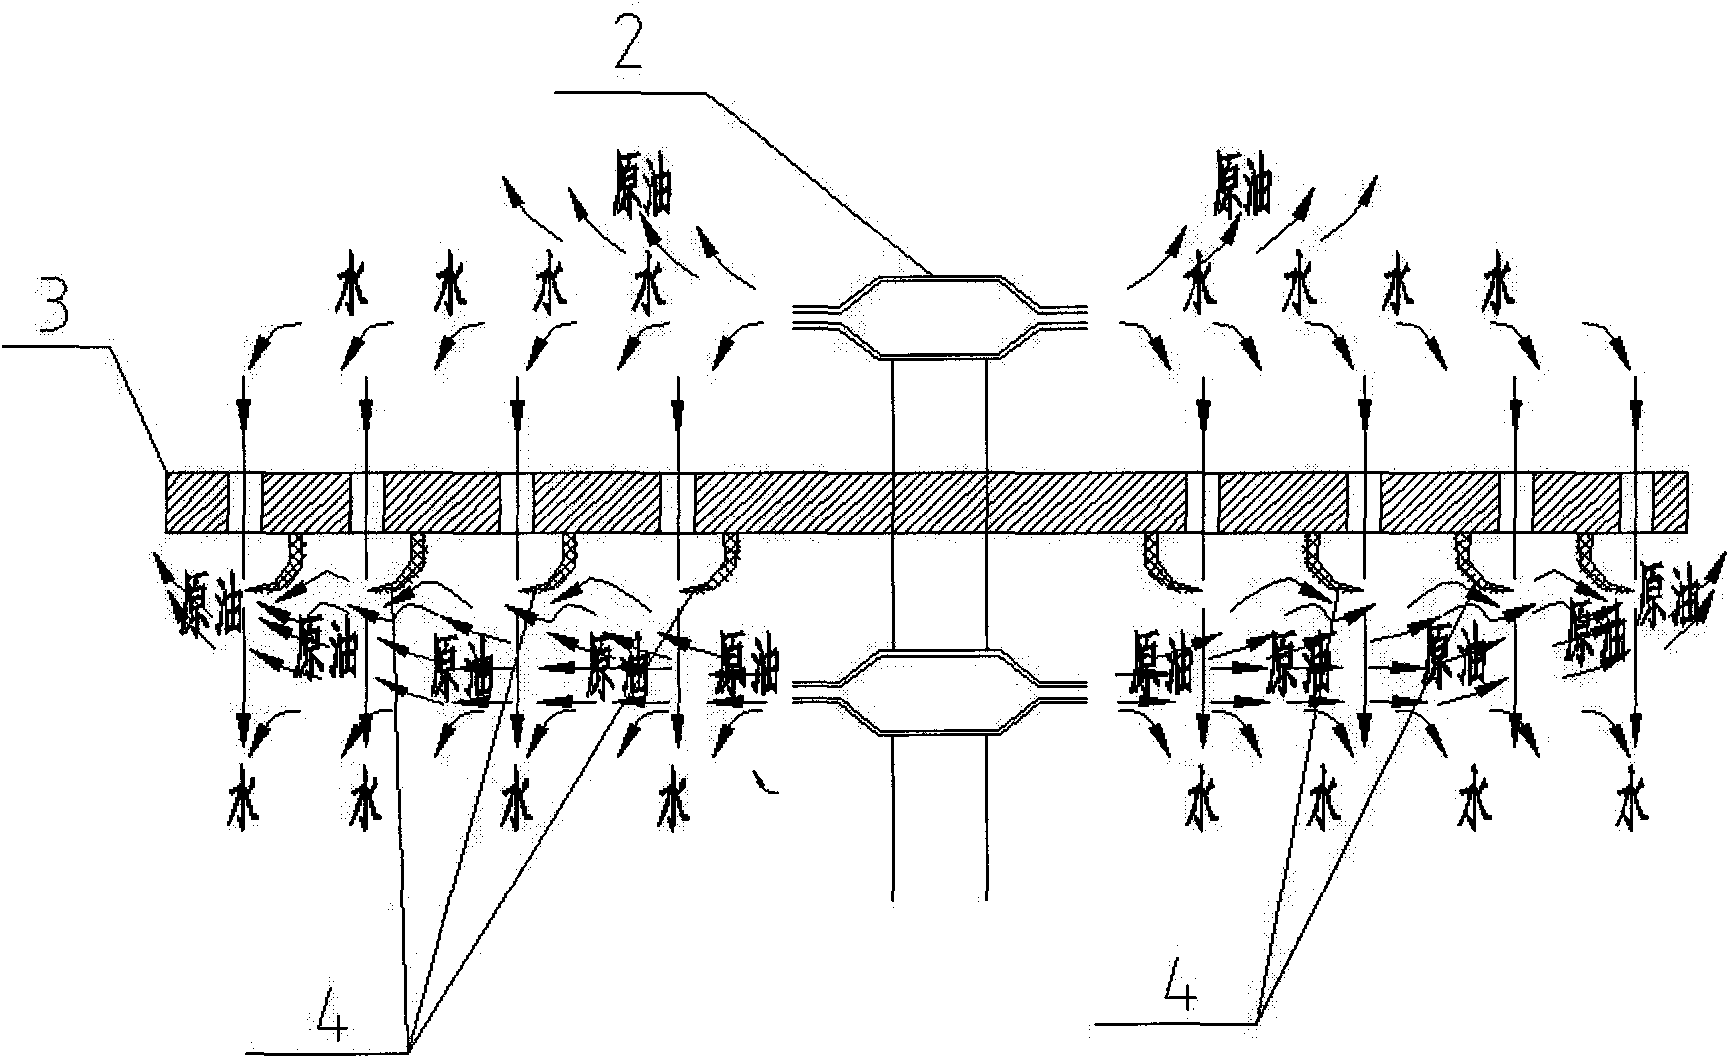 Novel high-speed electrical desalting and dewatering apparatus